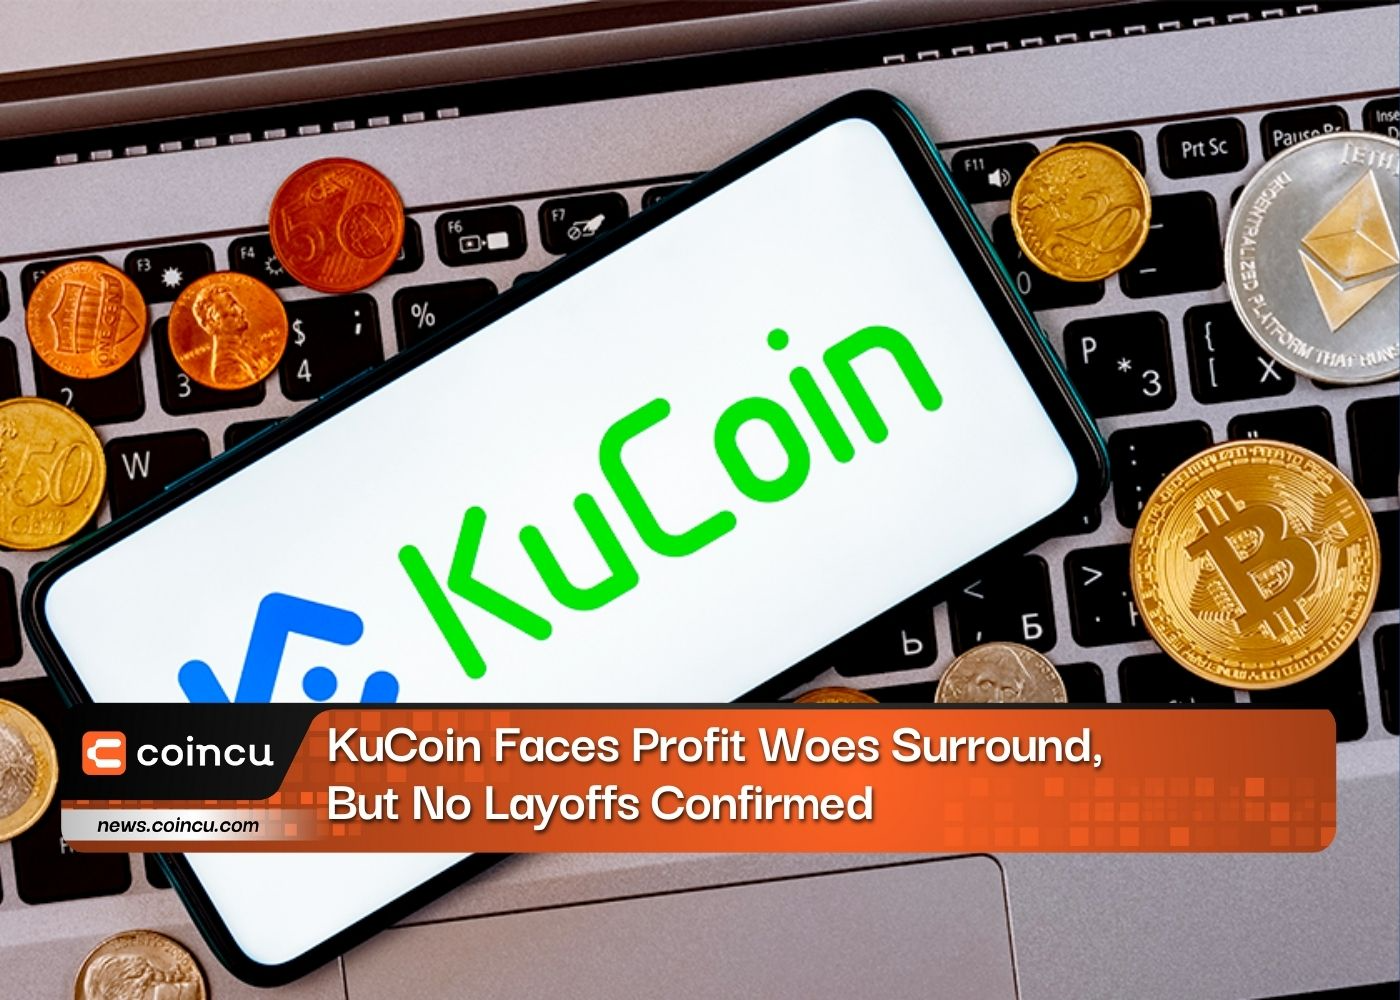 KuCoin Faces Profit Woes Surround, But No Layoffs Confirmed